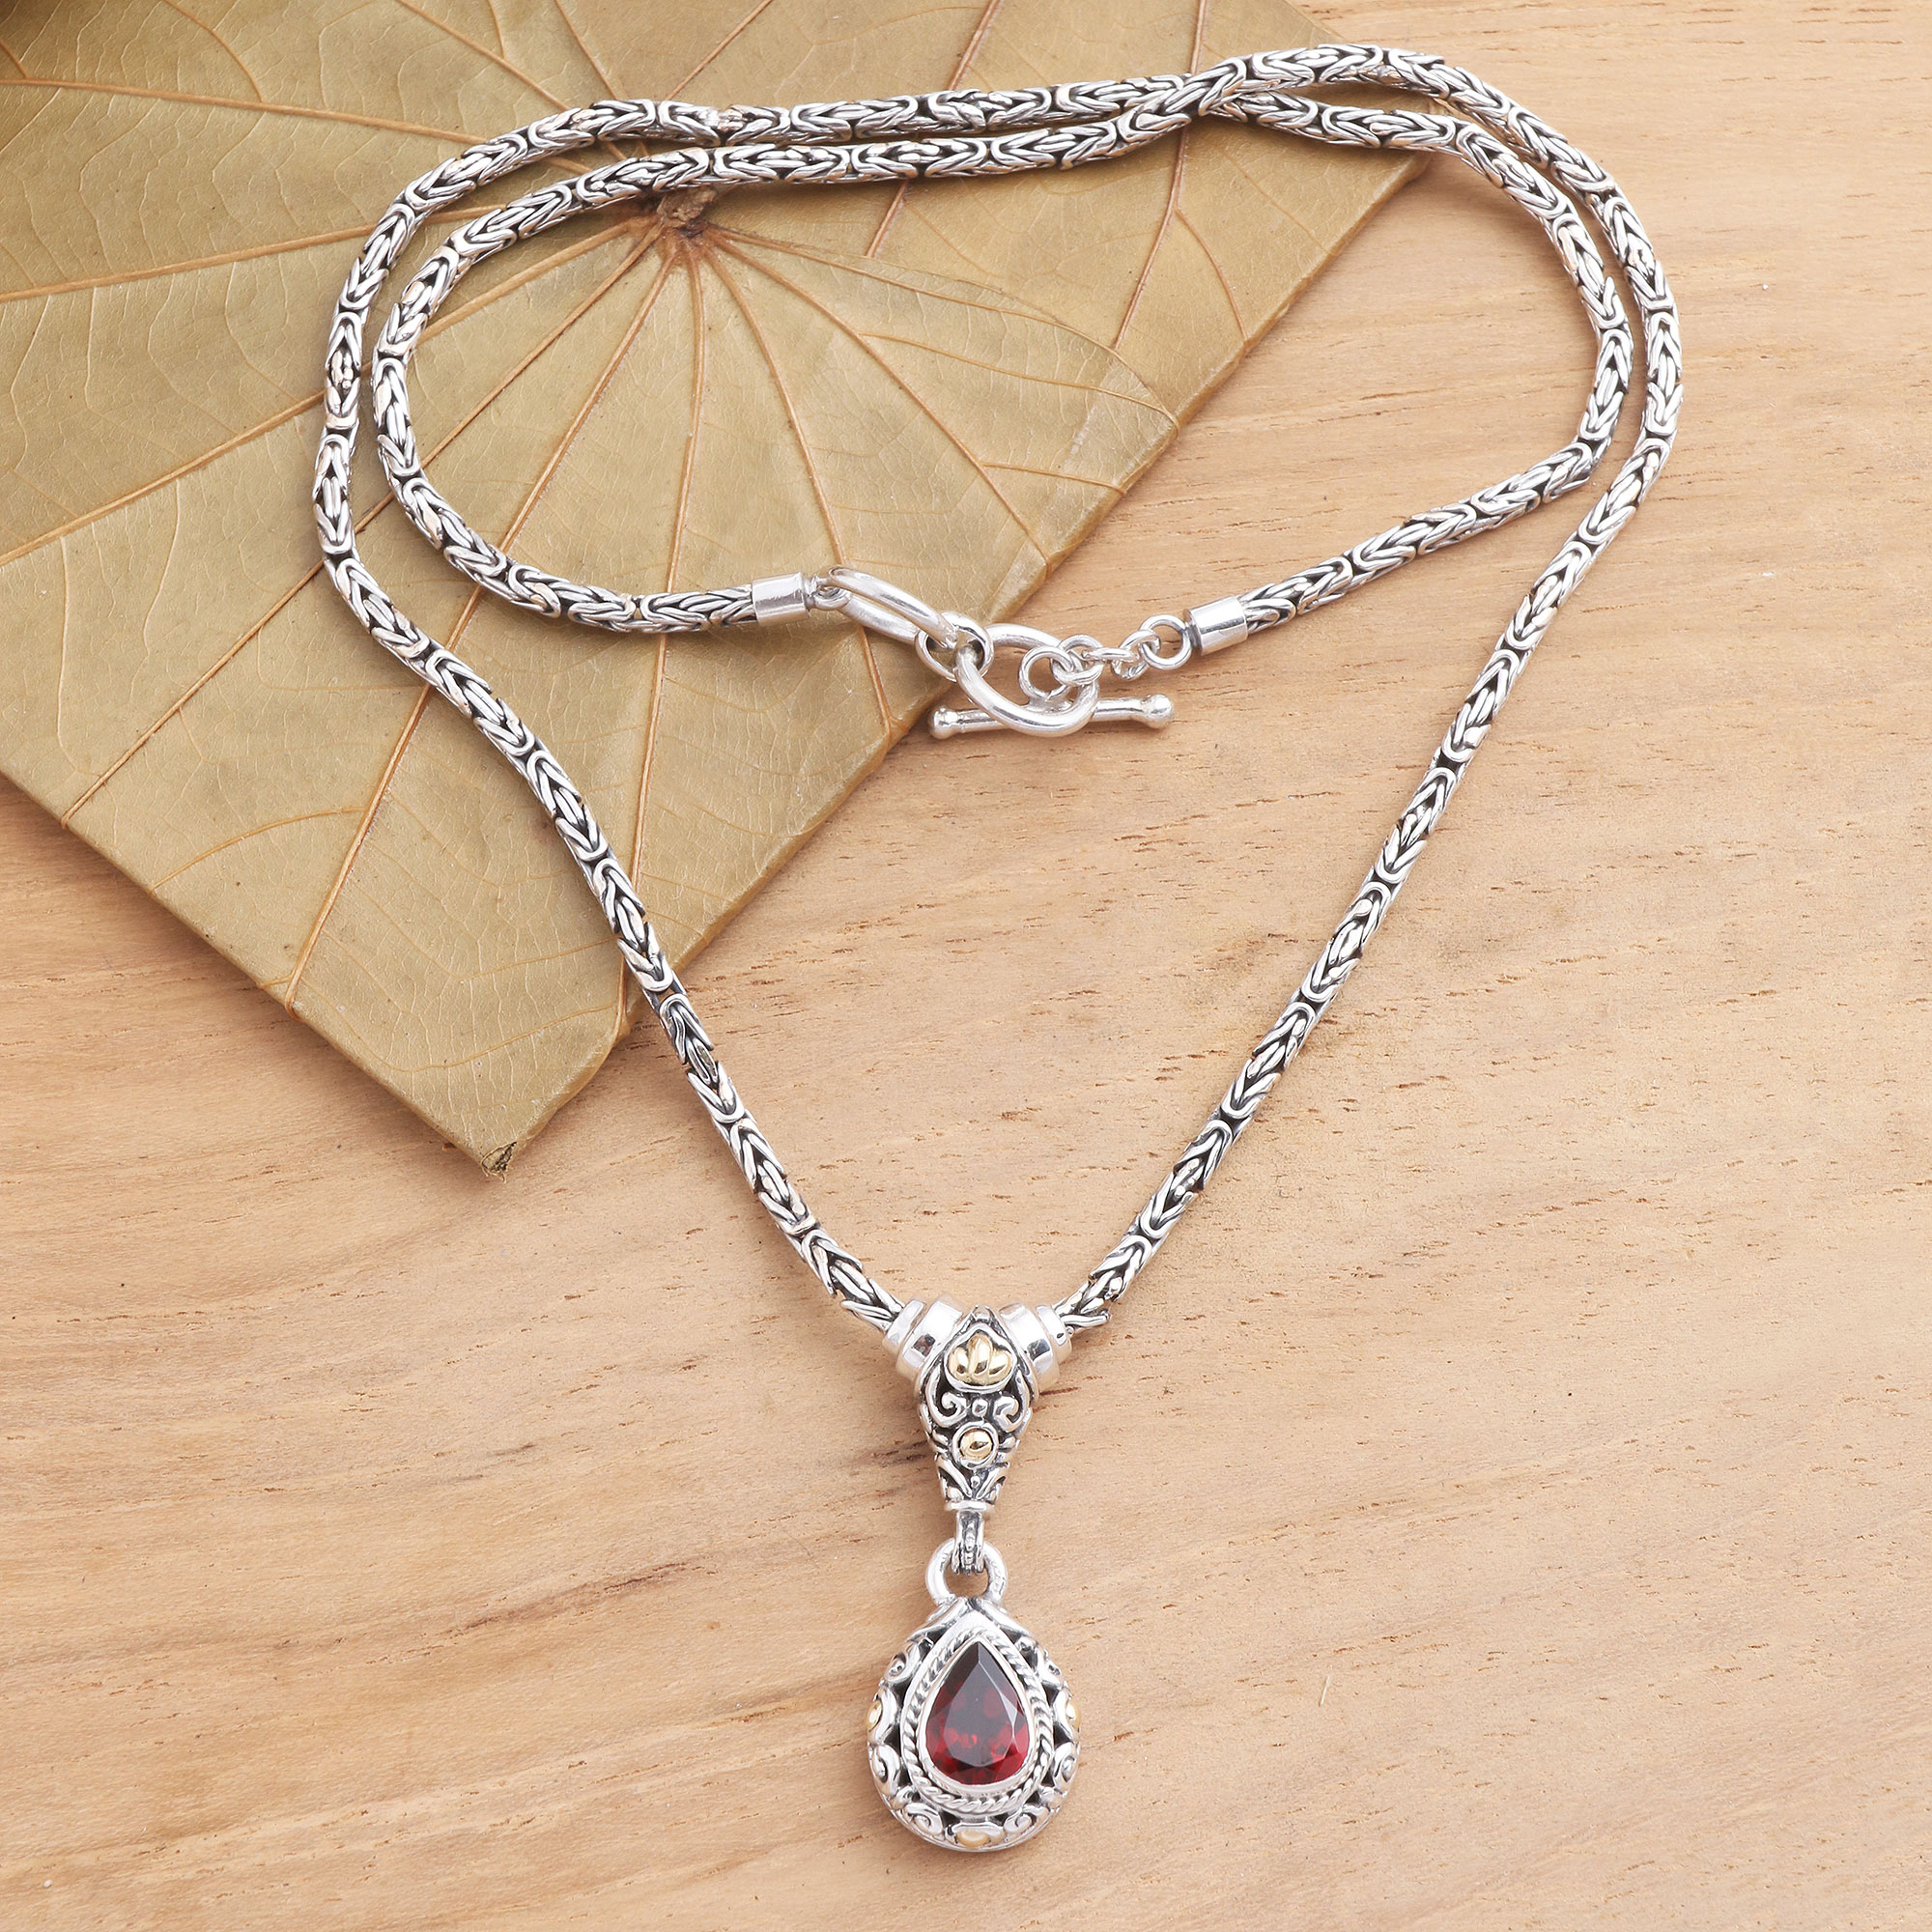 Necklace and pendant in silver and garnets